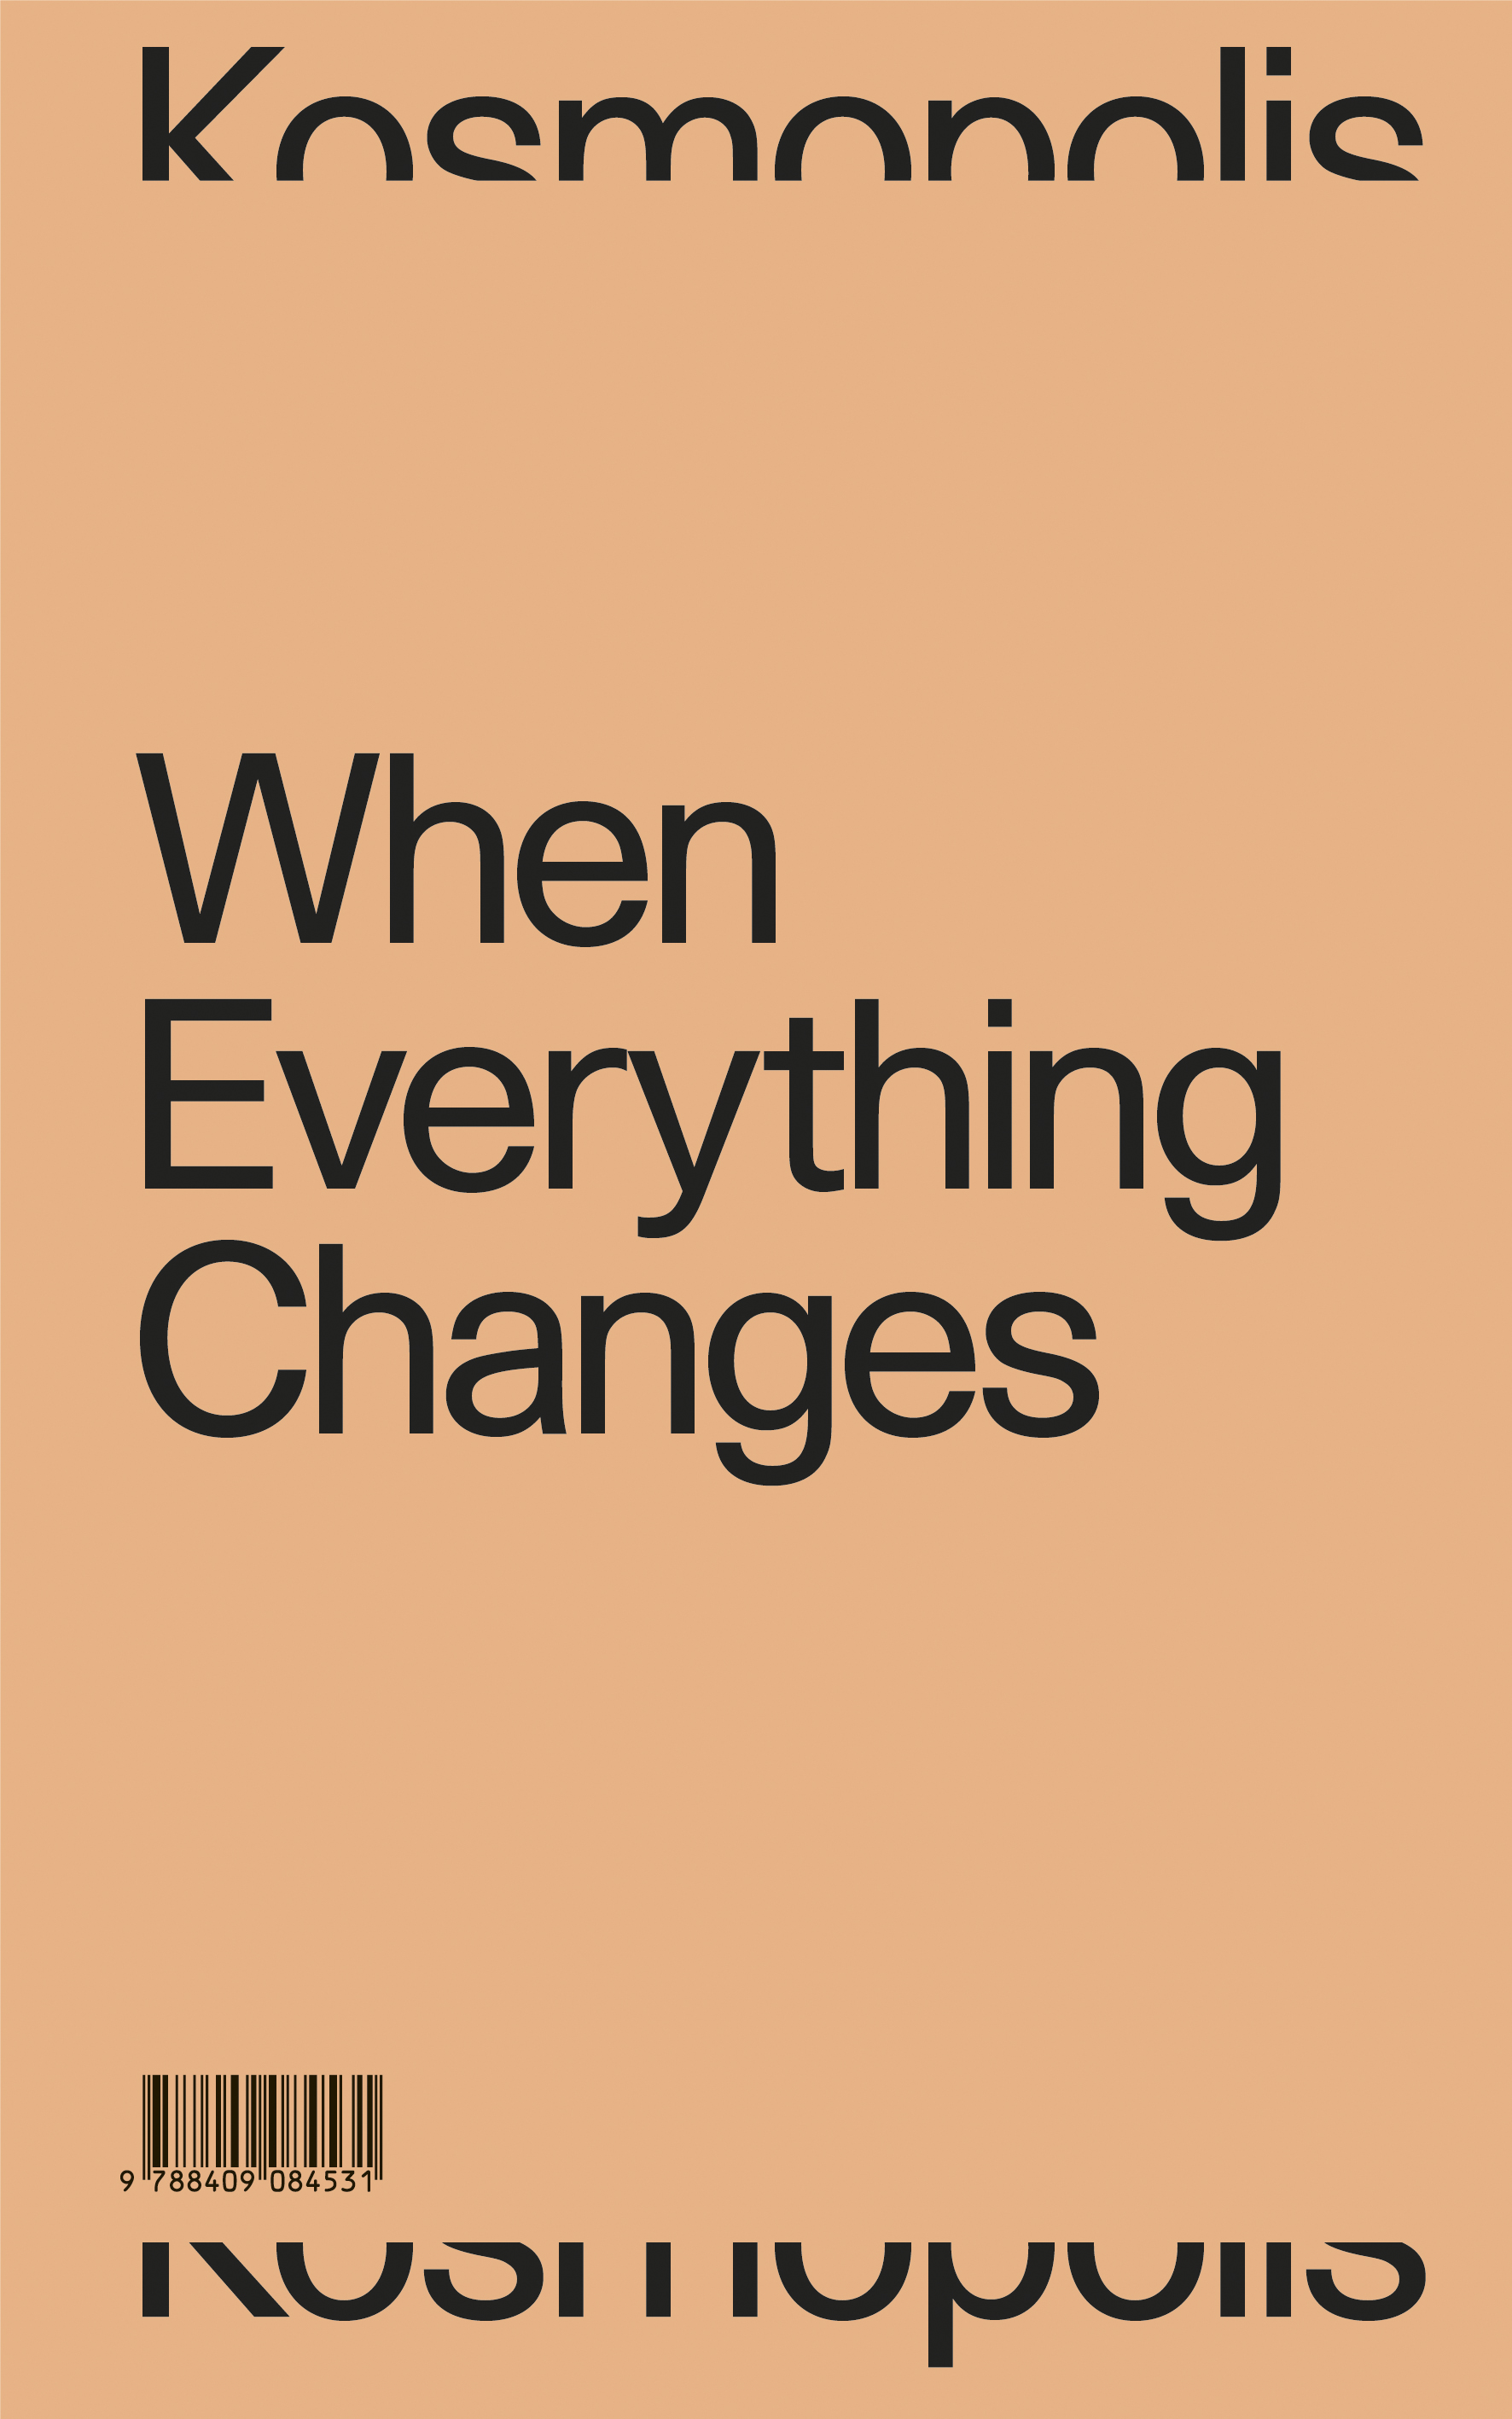 When everything changes / Quan tot canvia